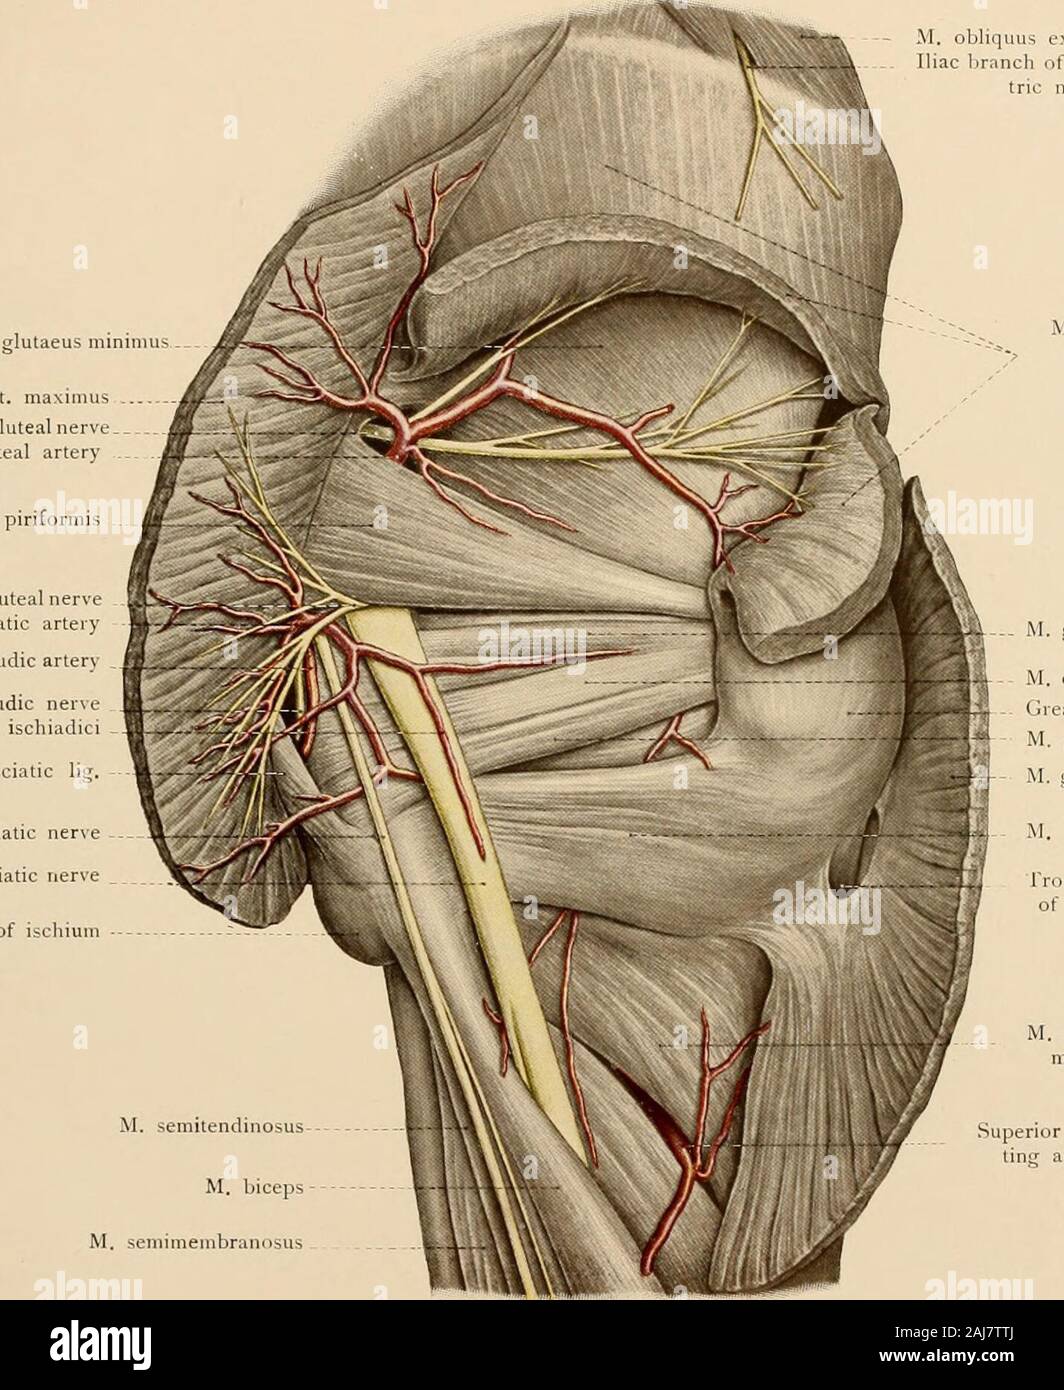 Atlas and text-book of topographic and applied anatomy . alcitonn marginaphenous opening)xternalpudic veins M. glut, maximus Superior gluteal nerve Gluteal artery Inferior gluteal nerveSciatic artery Internal pudic Ireat sacrosciatic lig, Small aberosity of ischium. quus ext. abdomini:nnch of ilio hypogas M.Gr M. obturator?at trochagemellus nf. M. glutaeus n ,ax. M. quadratus fe- o ichanteric in. glut. bursa perior perfora-ting artery THE REGION OF THE HIP. 157 FlG. 77.—The subinguinal region with the vessels and lymphatic glands lying upon the deep fascia.Fig. 78.—The topography of the deep g Stock Photo